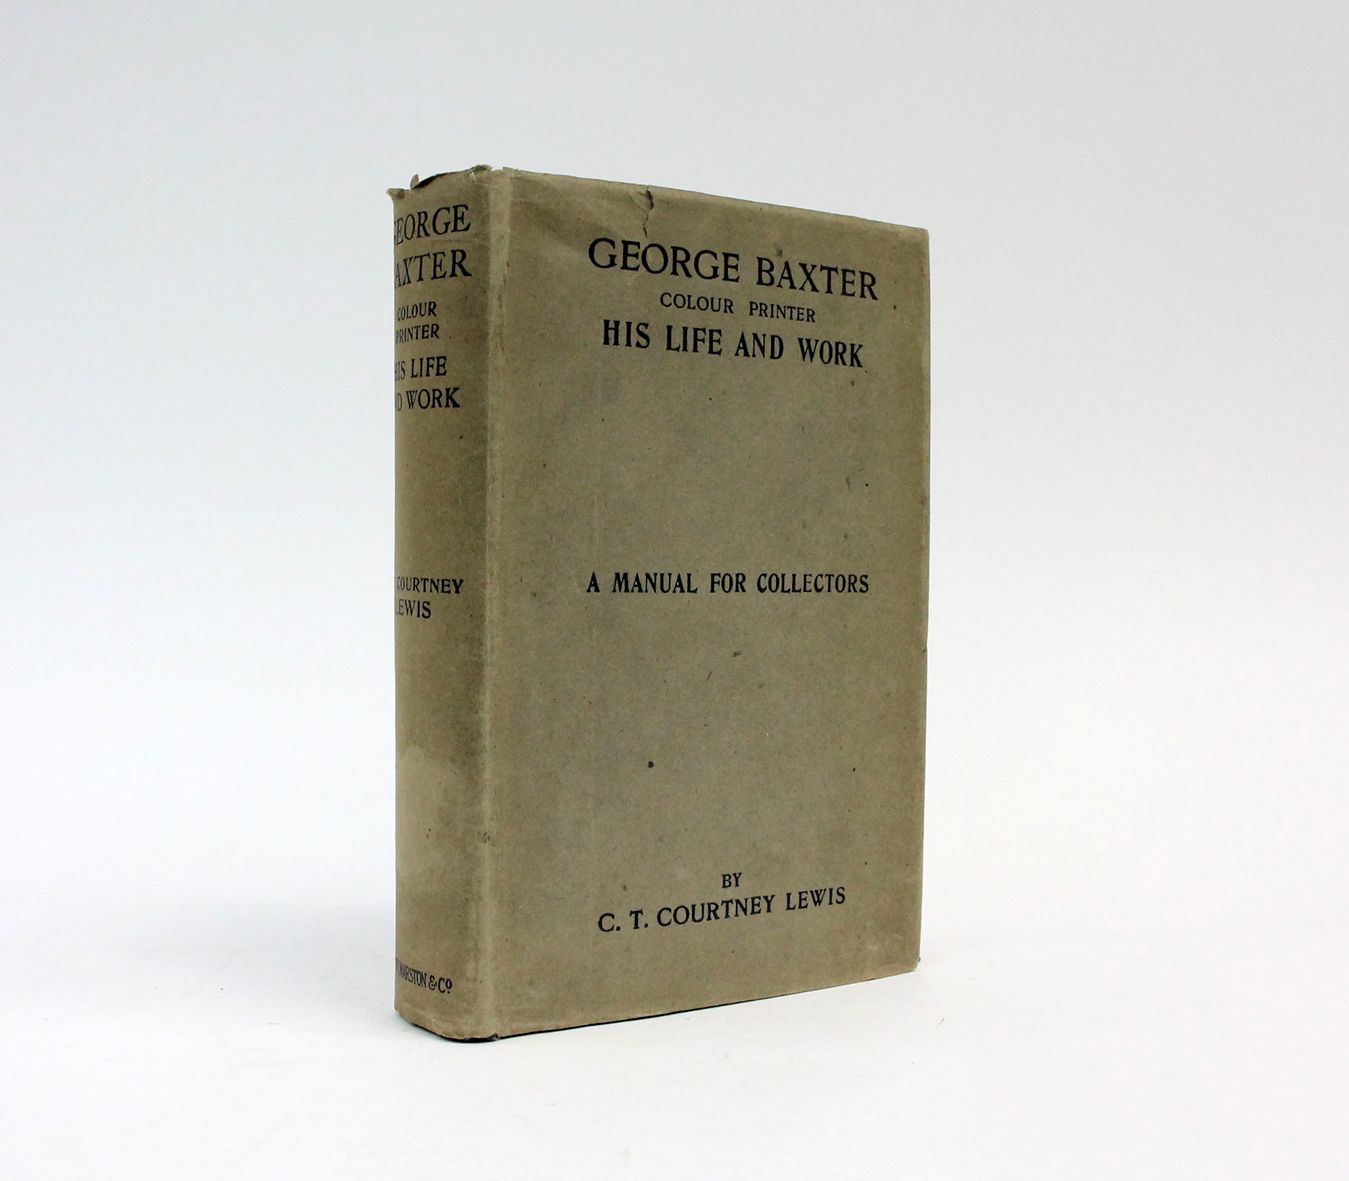 GEORGE BAXTER (COLOUR PRINTER) HIS LIFE AND WORK -  image 1